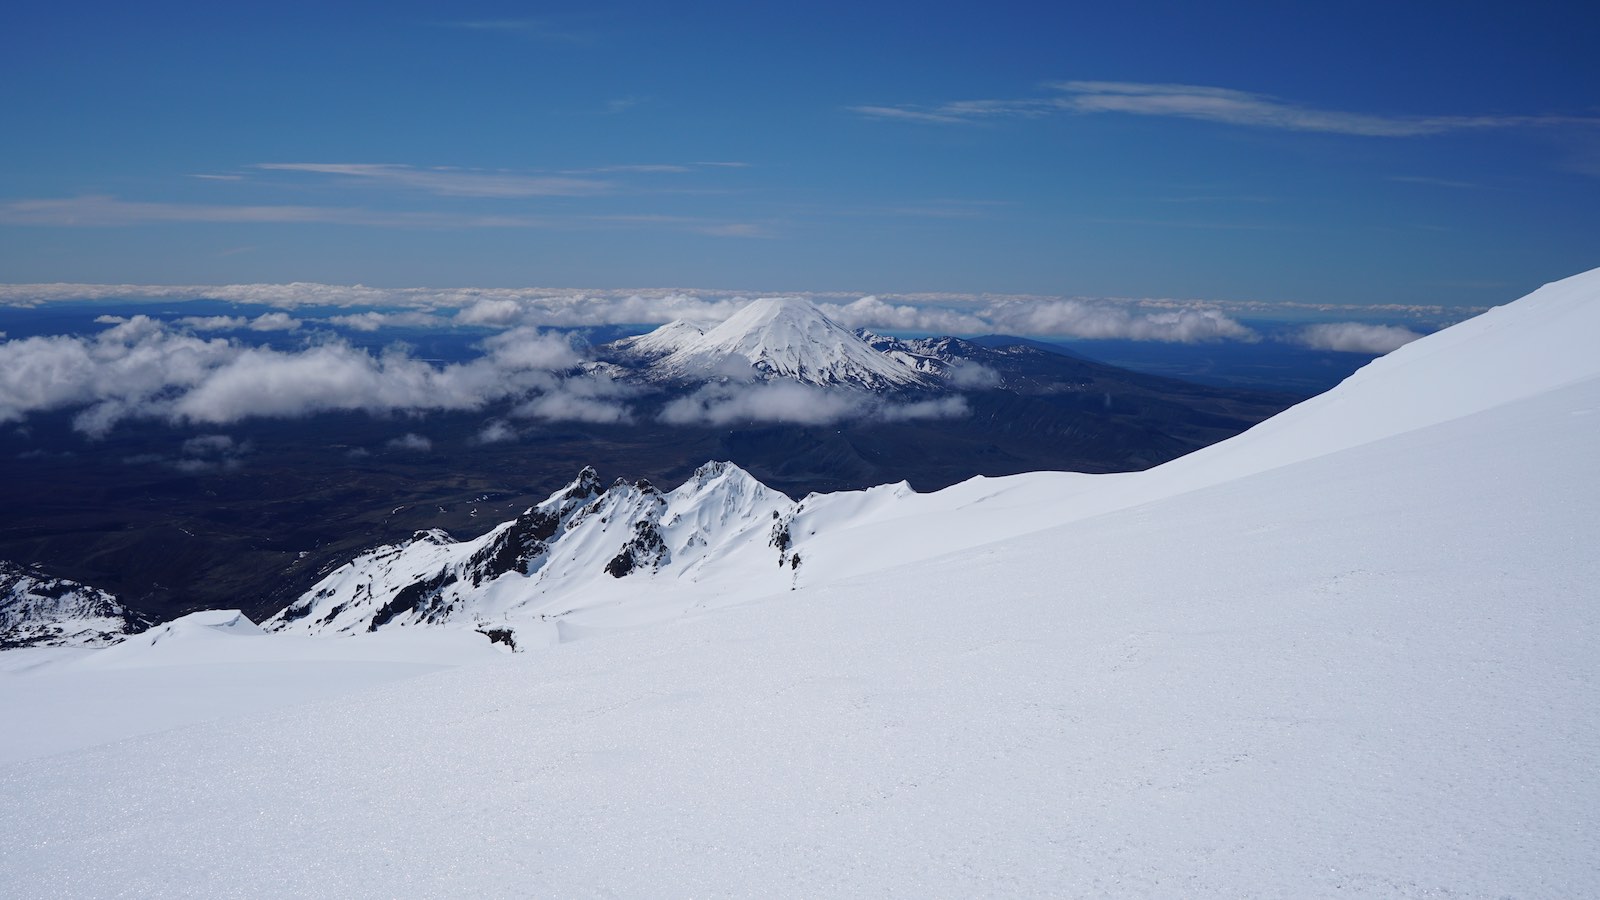 We took small 2 minute breaks every once in a while to catch our breath and take in the scenery, and the view behind us was nothing short of breathtaking. This is Mt. Ngauruhoe from the slopes of Ruapehu